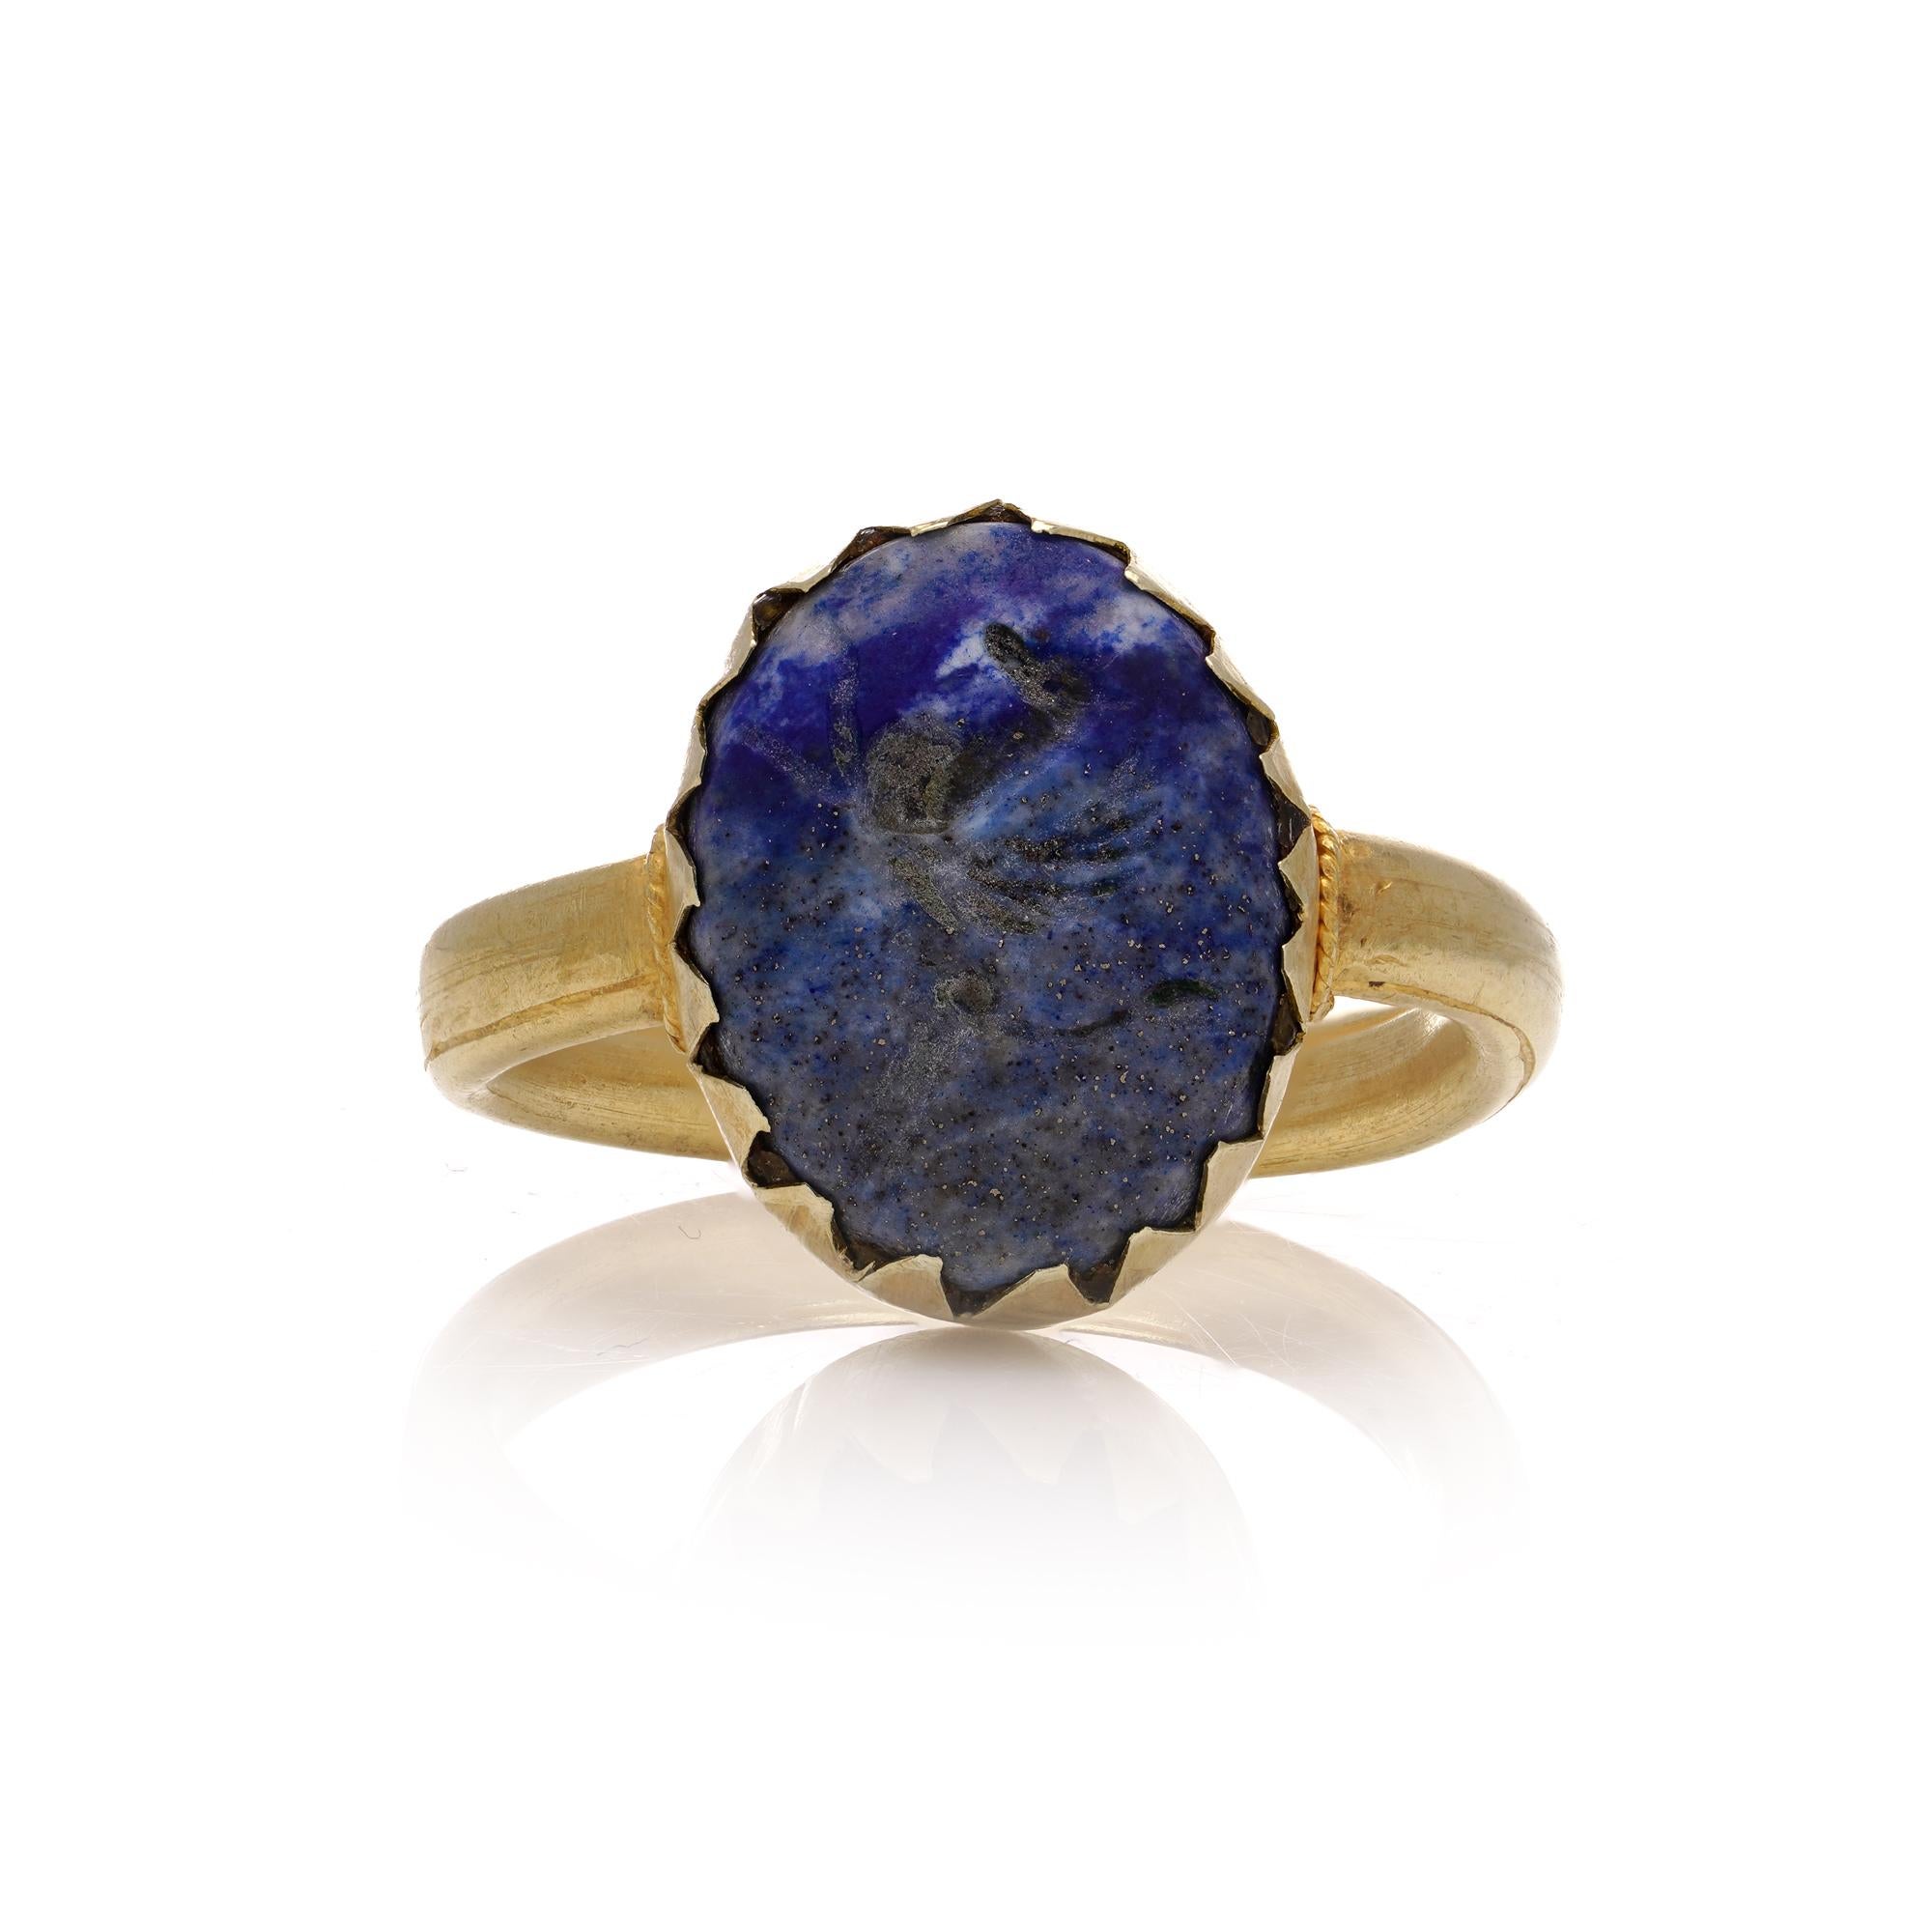 Antique 19th Century 18kt gold lapis lazuli intaglio ring with pegasus carving.
Shank has been added later.

In intaglio rings, Pegasus symbolizes freedom, creativity, and spiritual ascension. Its image evokes the wearer's desire to break free from